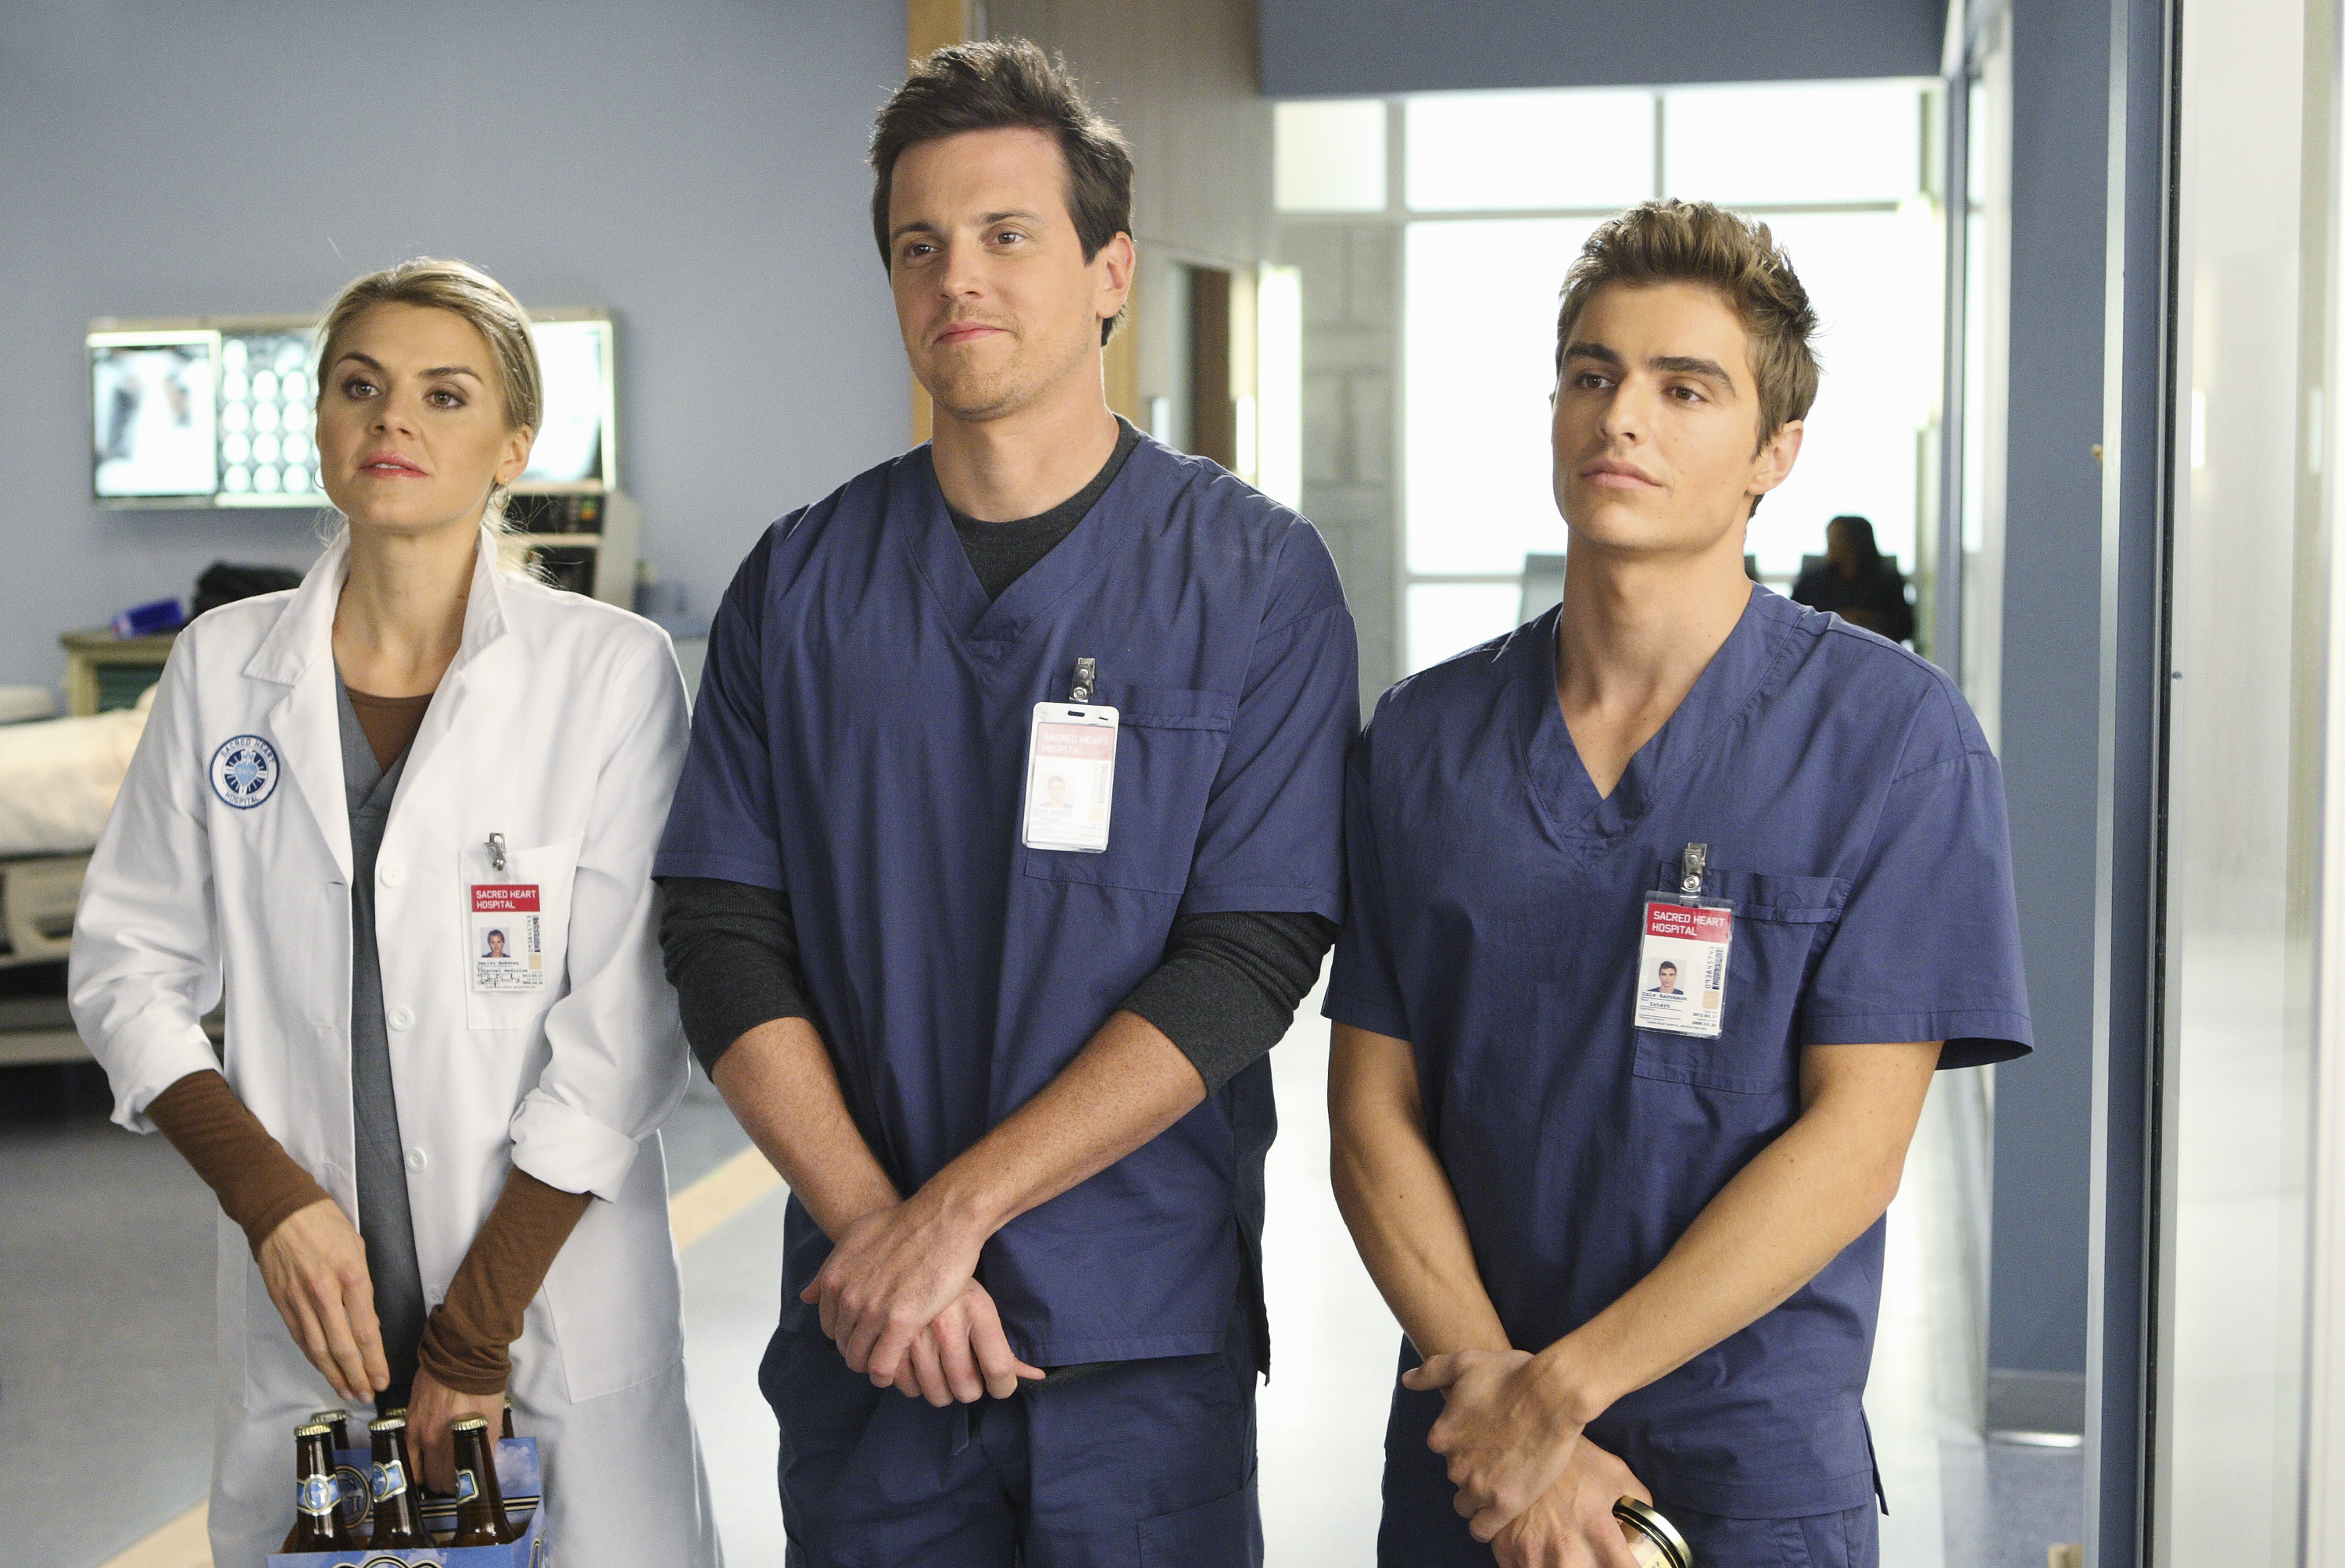 Scrubs (TV Series): Dave Franco as Cole Aaronson, Michael Mosley as Drew Suffin, Eliza Coupe as Denise Mahoney. 3000x2010 HD Background.